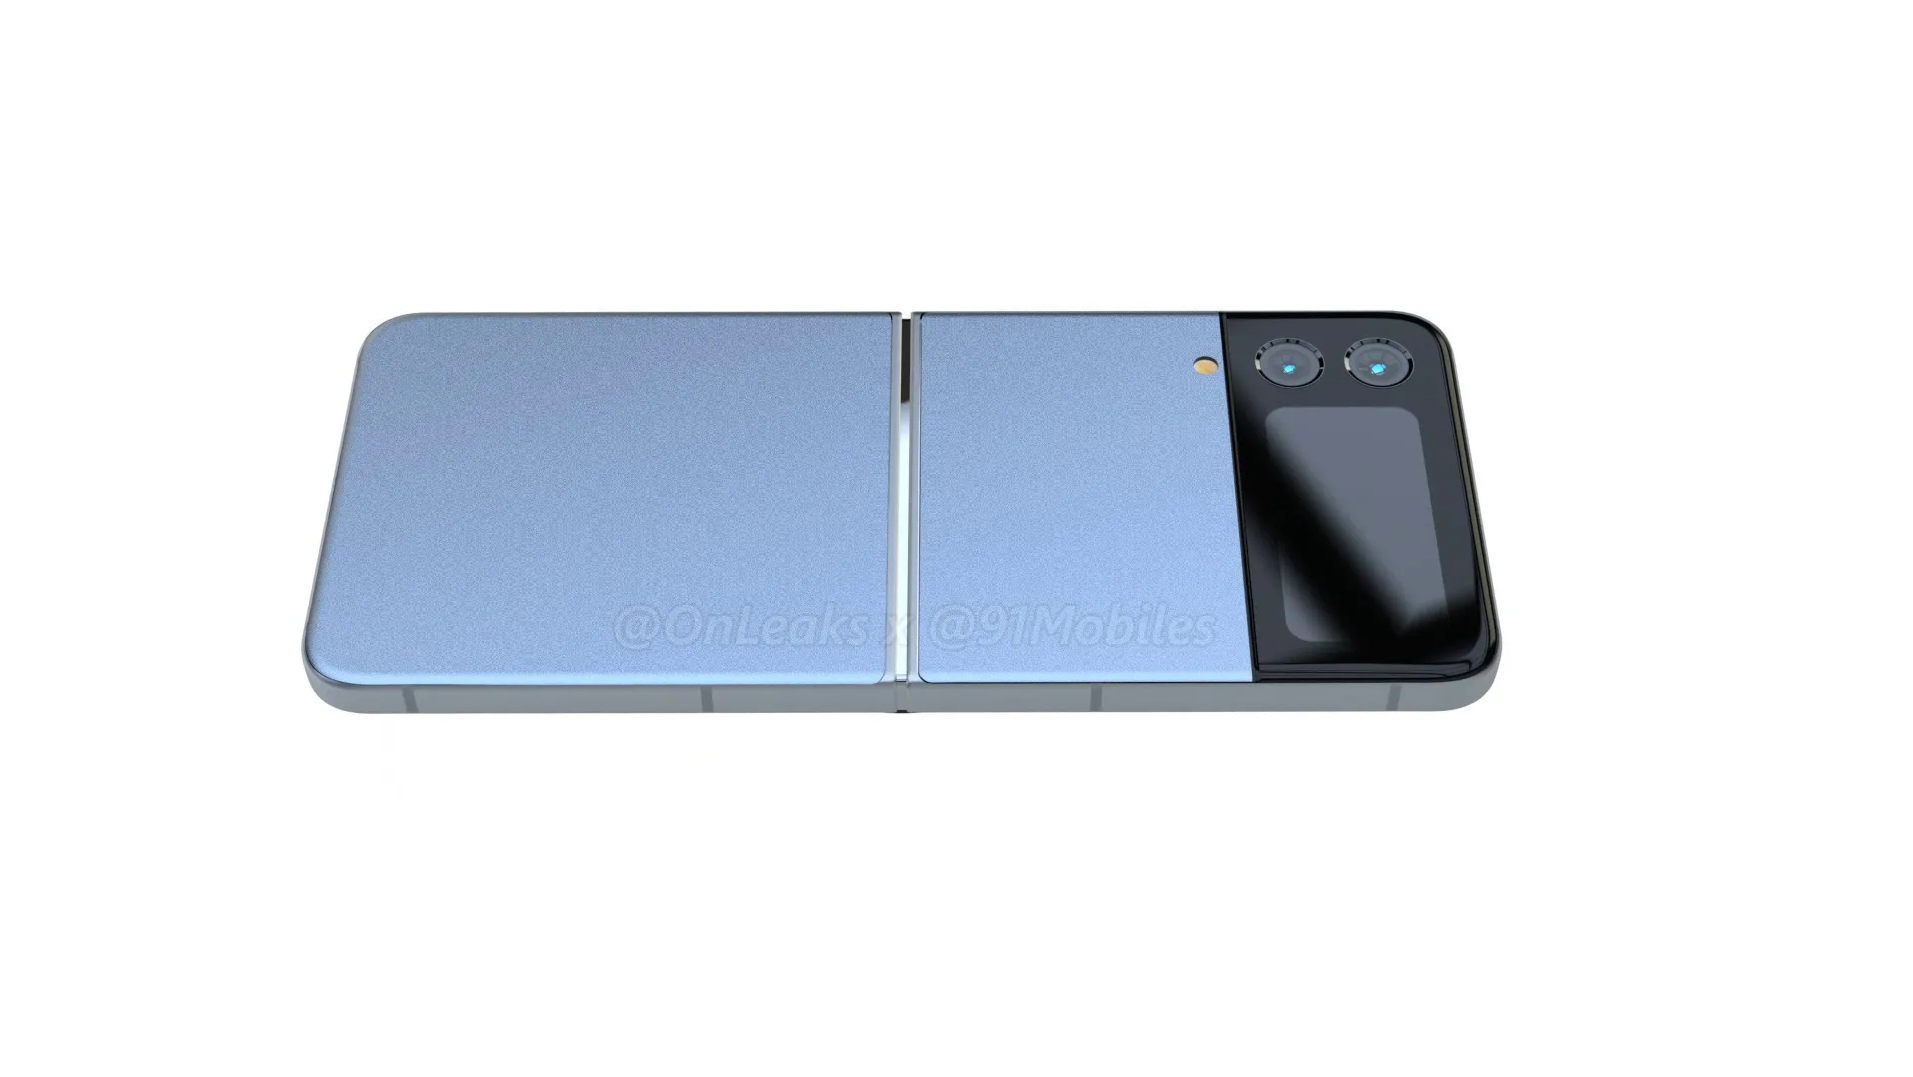 An unofficial rendering of the Samsung Galaxy Z Flip 4, shown open horizontally and face down